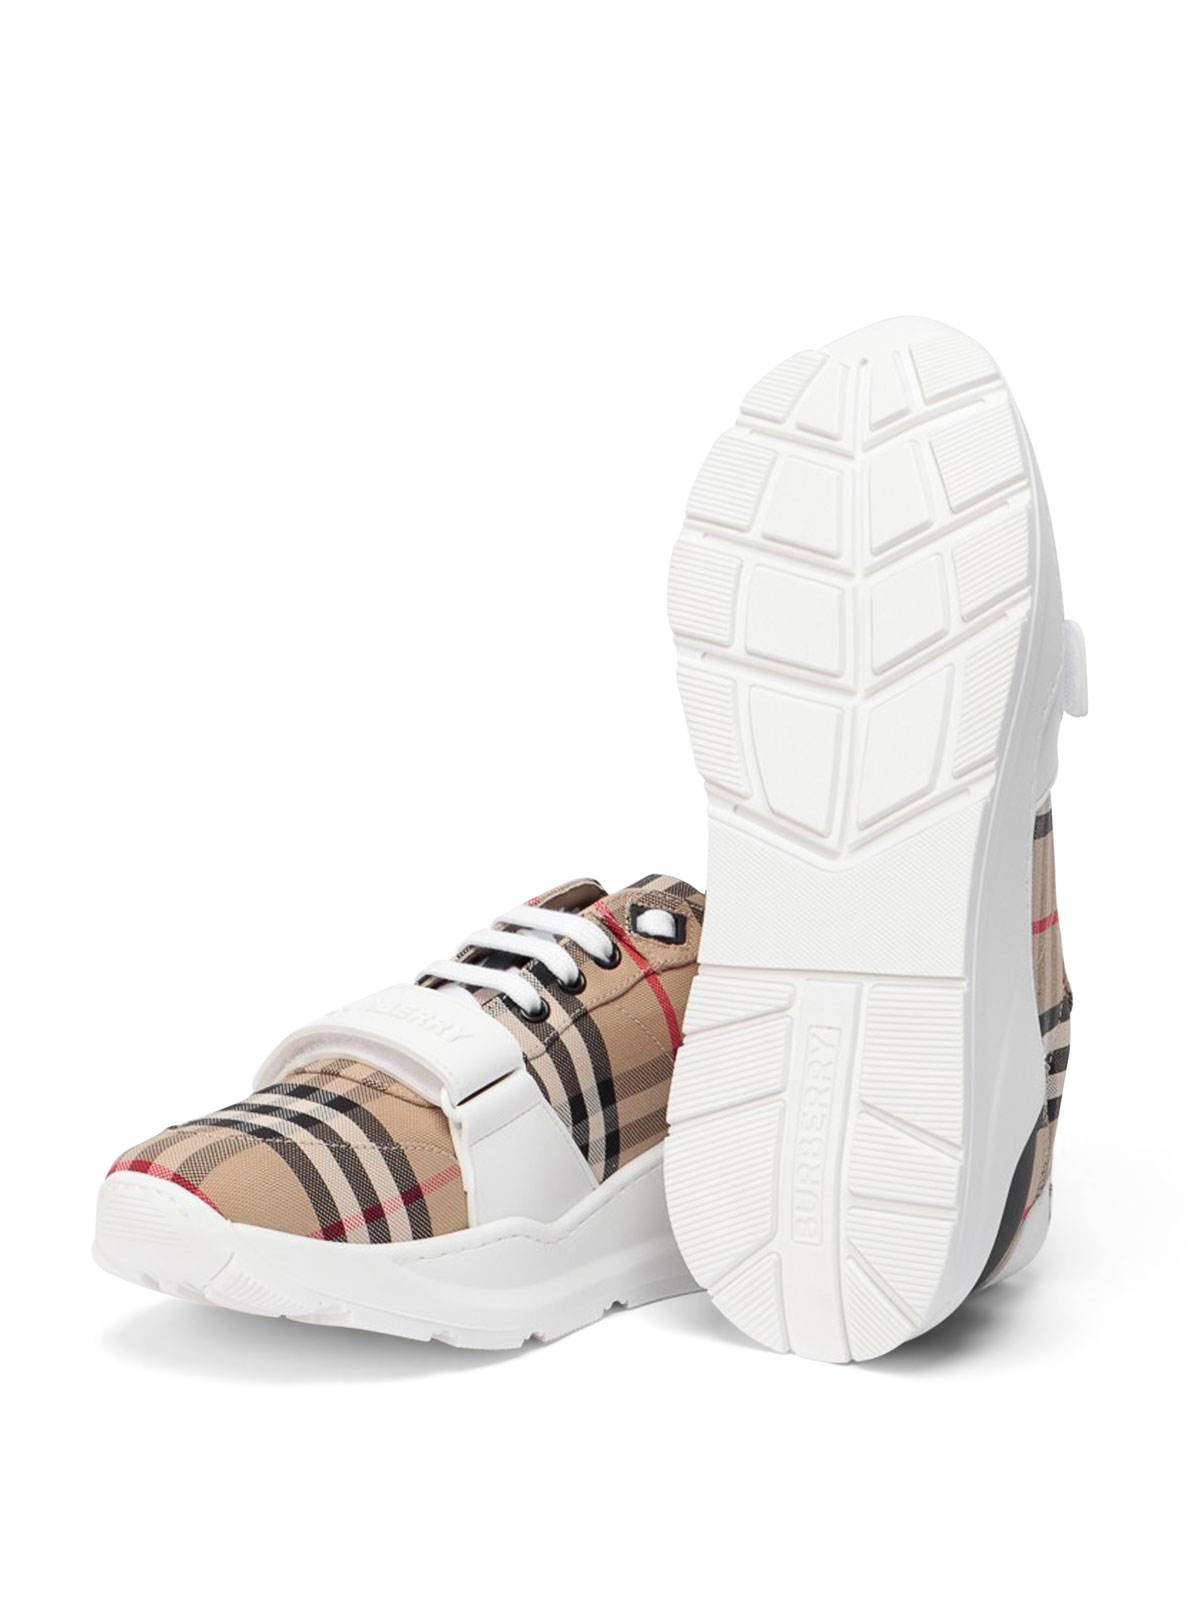 Shop Burberry Vintage Check Cotton Blend Sneakers In Beis Oscuro